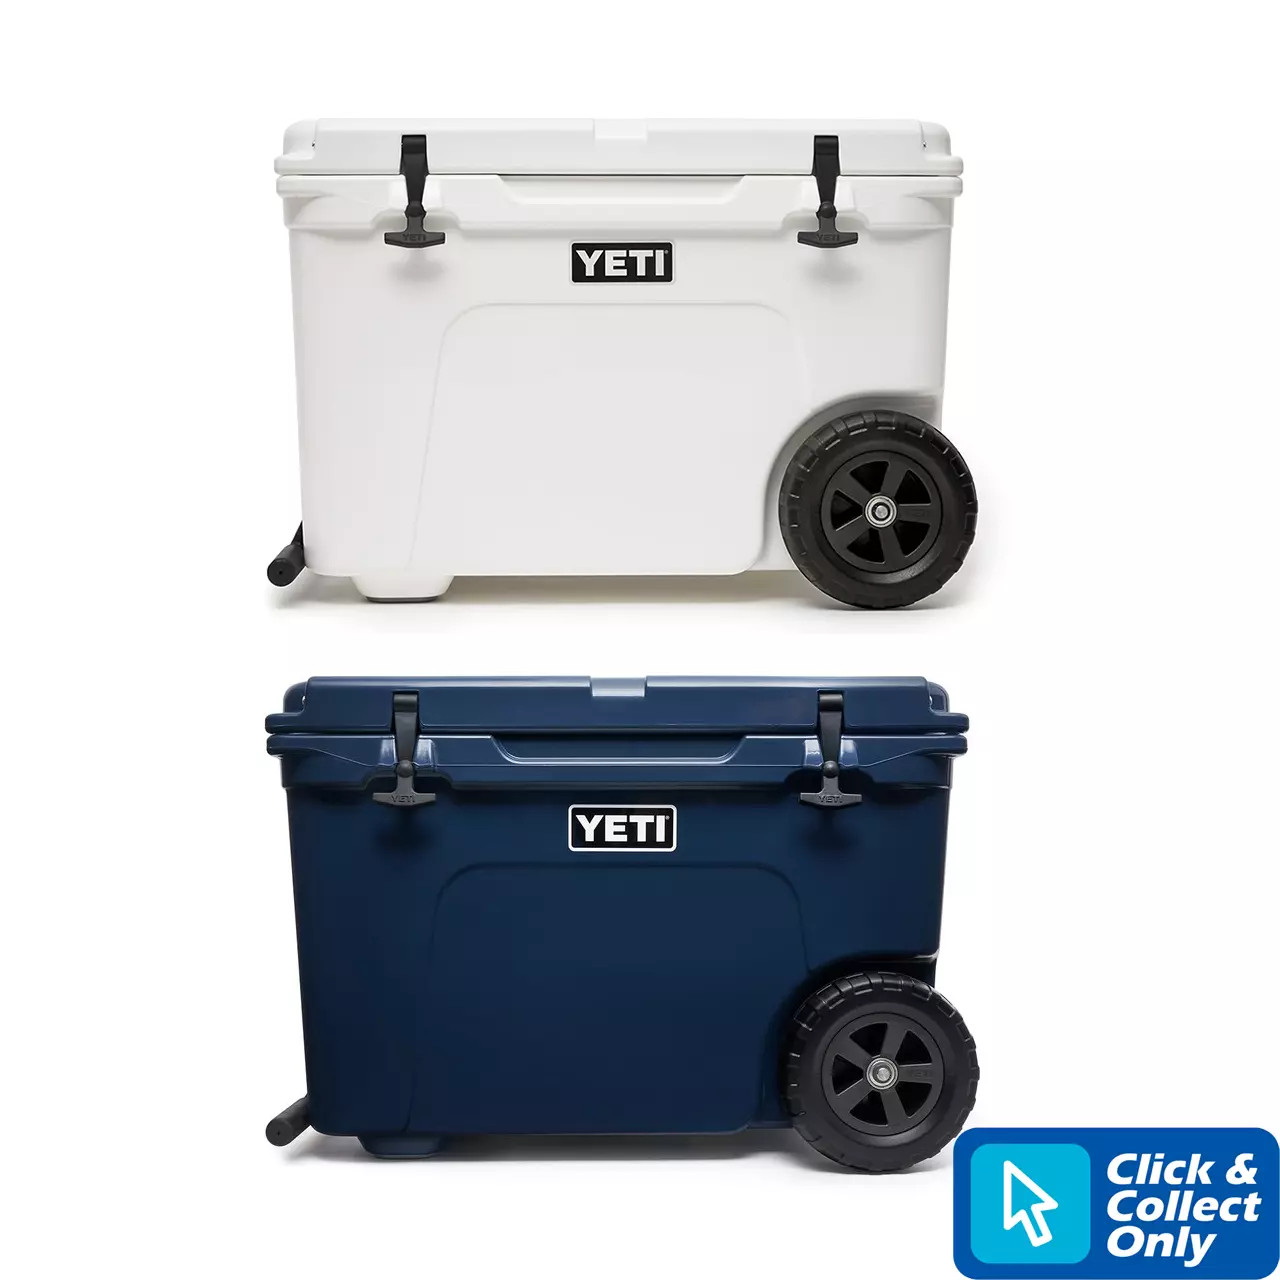 Accessories - Coolers - Page 1 - Tackle World Adelaide Metro